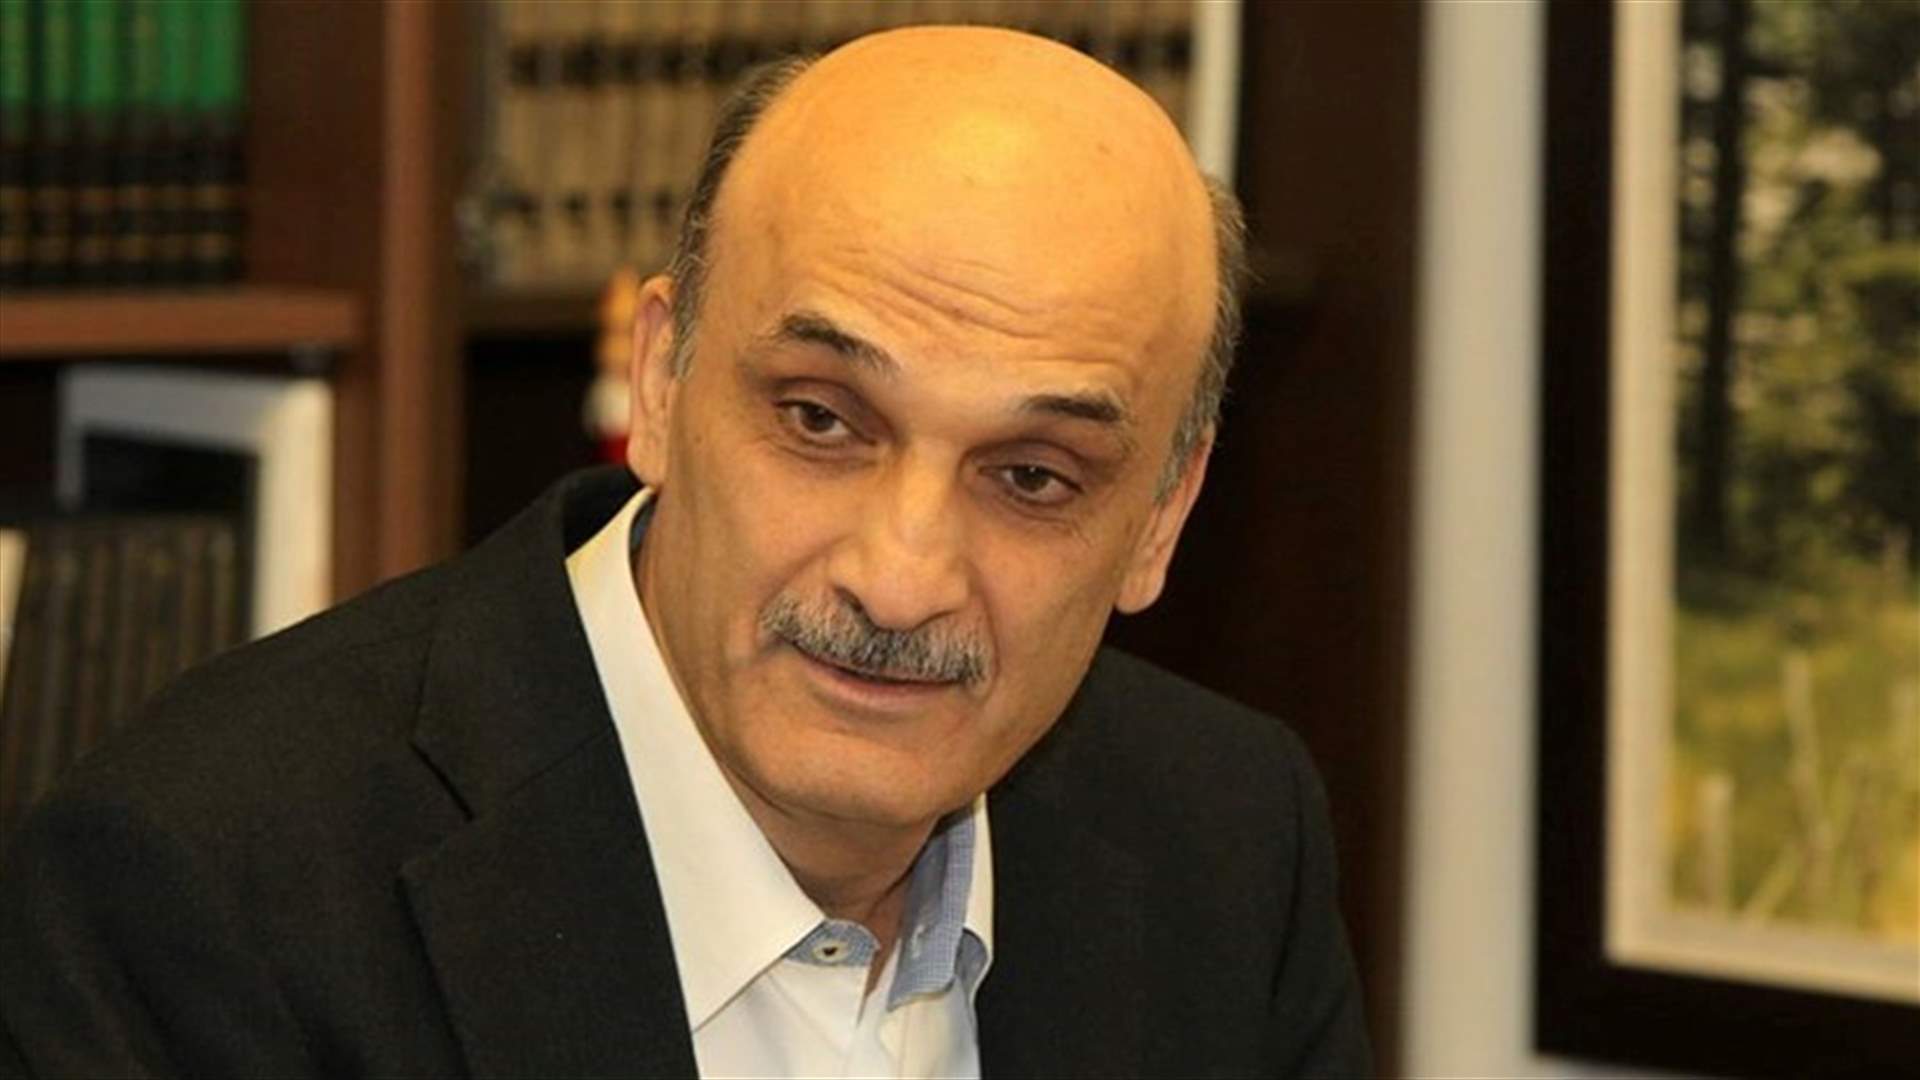 Geagea says disputes over shares are veiled attempt to target LF-FPM alliance